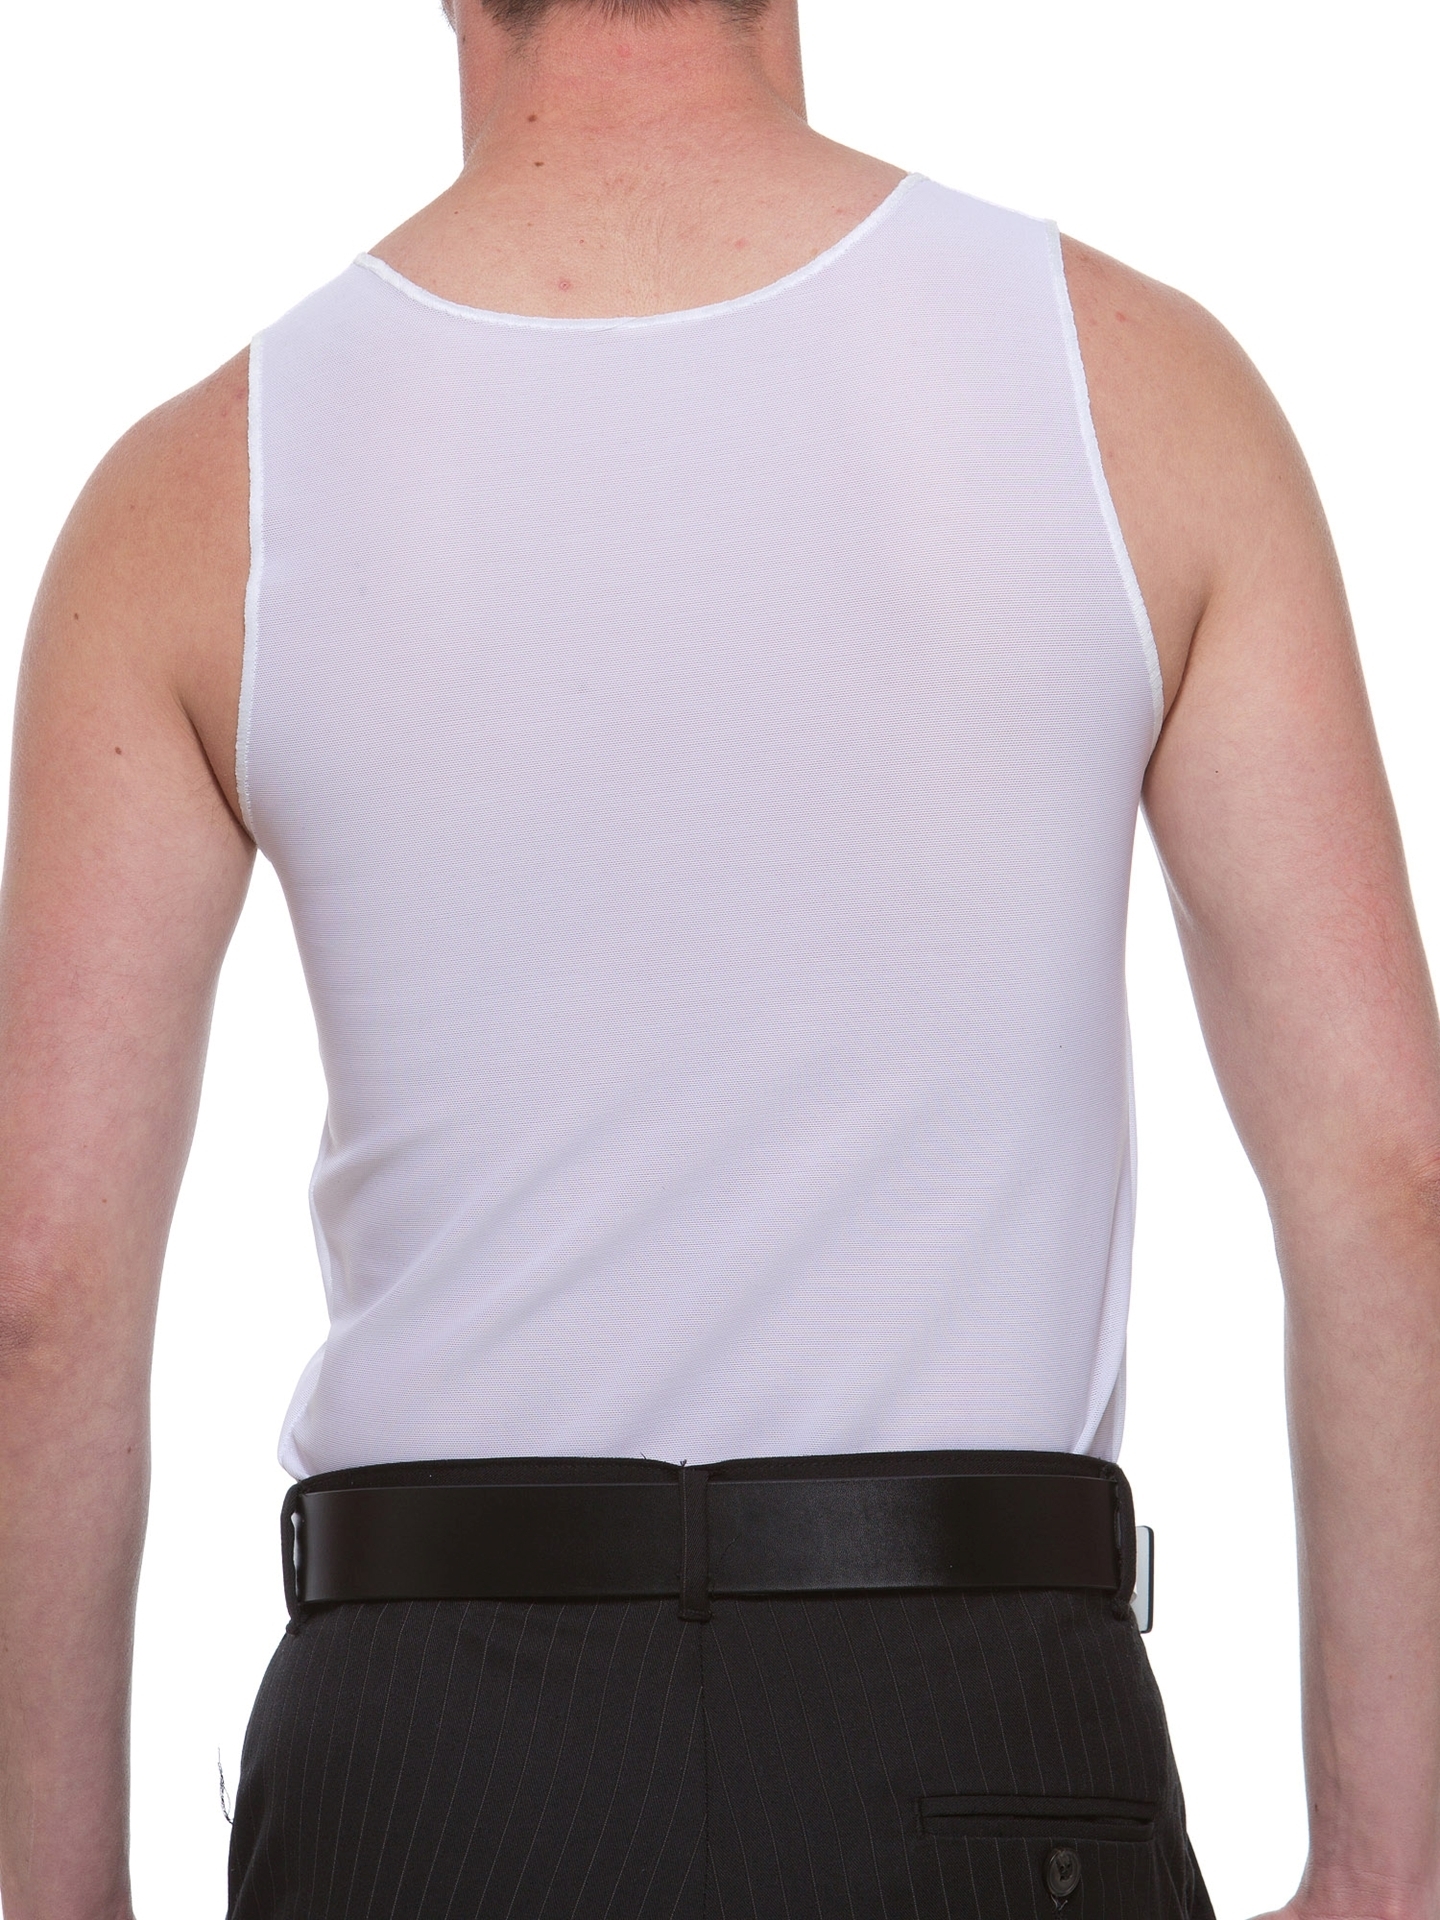 Ultimate Chest Binder Tank. FTM Chest Binders for Trans Men by Underworks